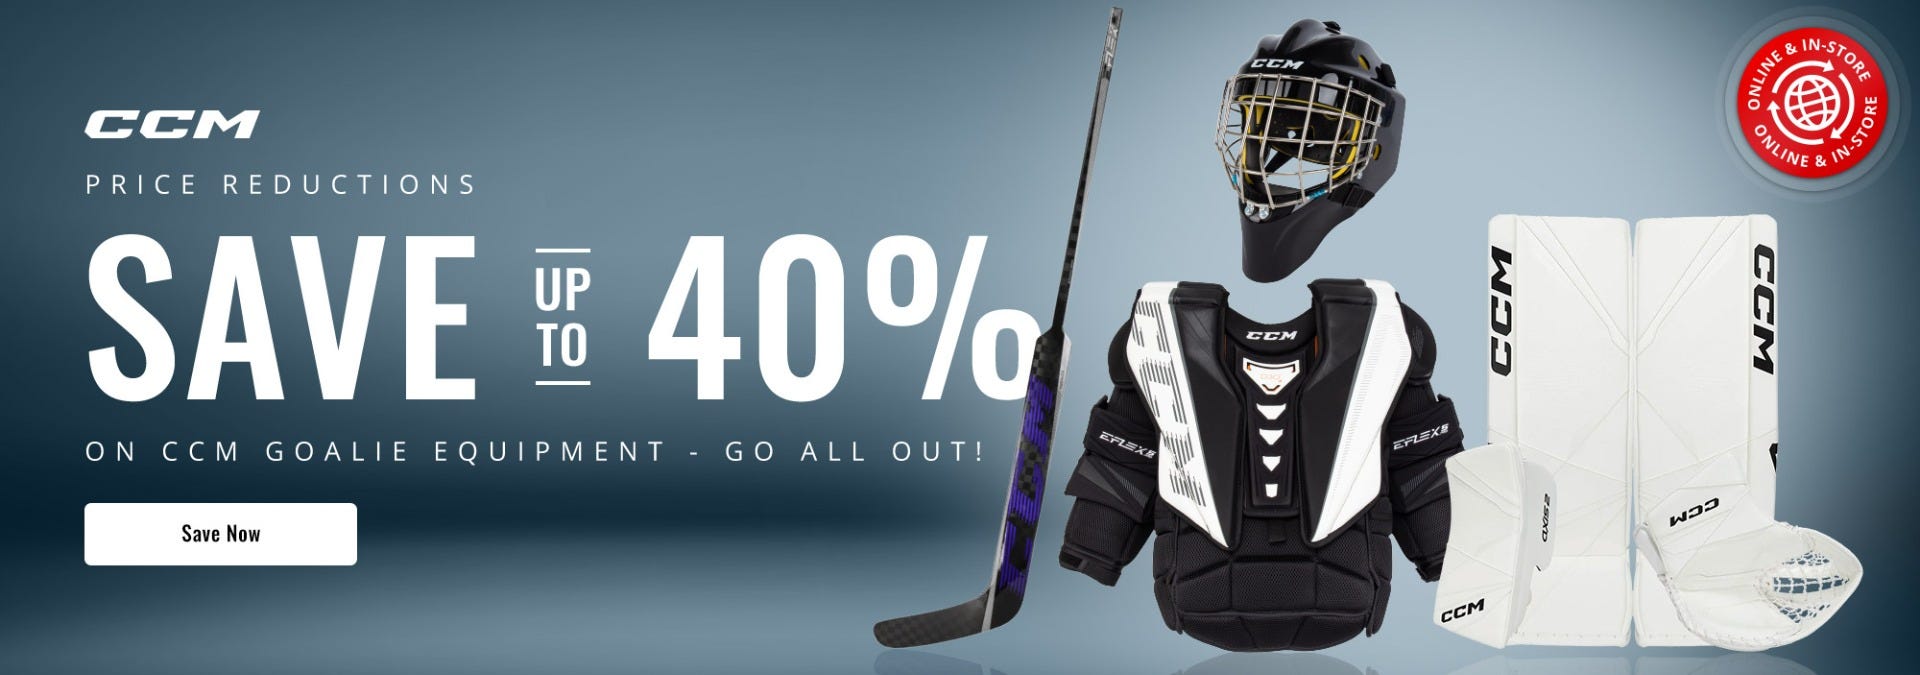 Save up to 40% on CCM Axis 2 & Extreme Flex 5